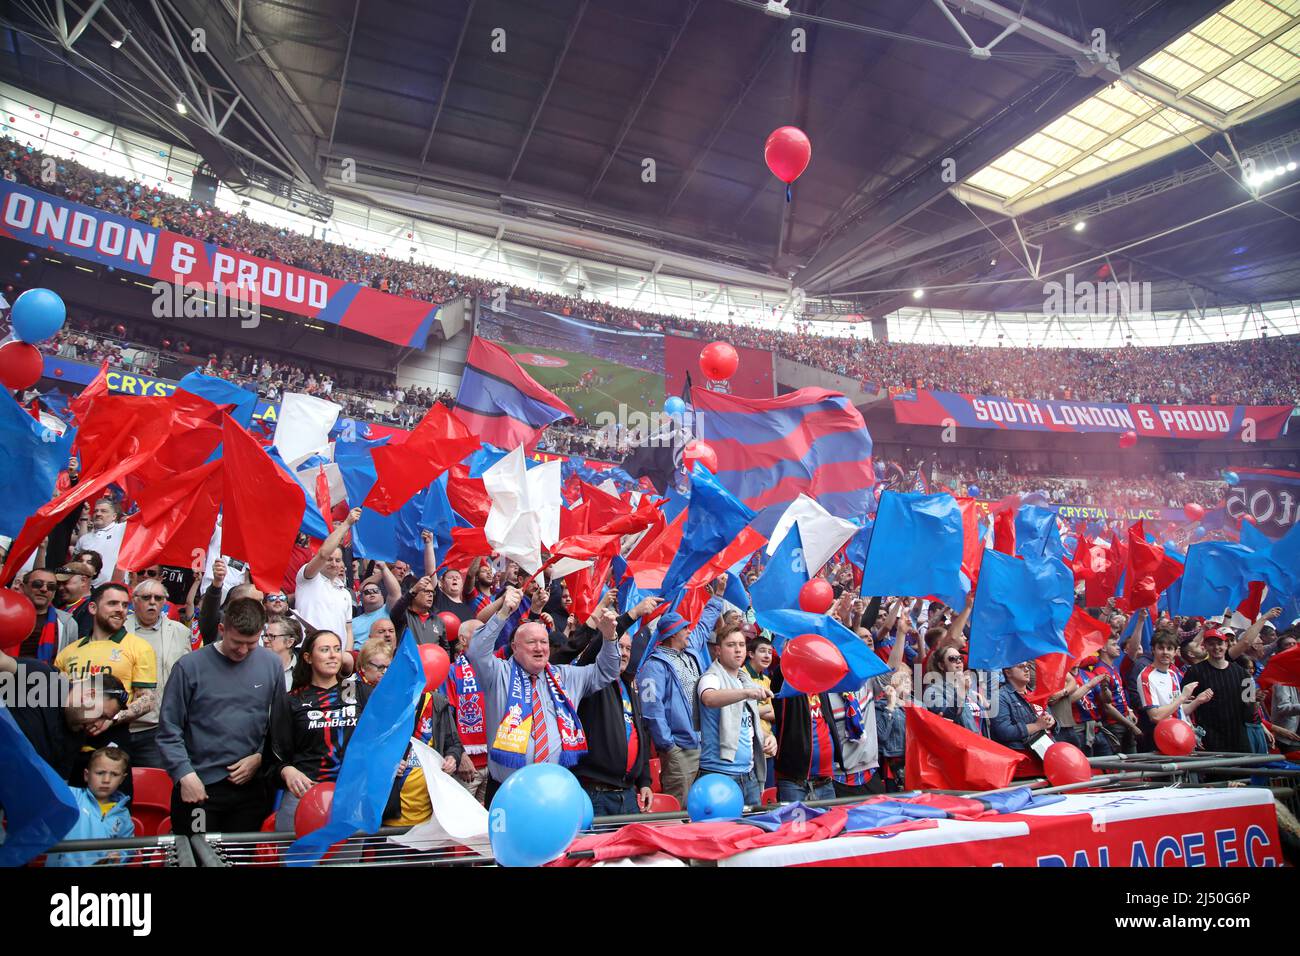 London, UK. 17th Apr, 2022. Palace fans at the Emirates FA Cup Semi-Final of Chelsea v Crystal Palace at Wembley Stadium, London, UK on 17th April 2022. Credit: Paul Marriott/Alamy Live News Stock Photo